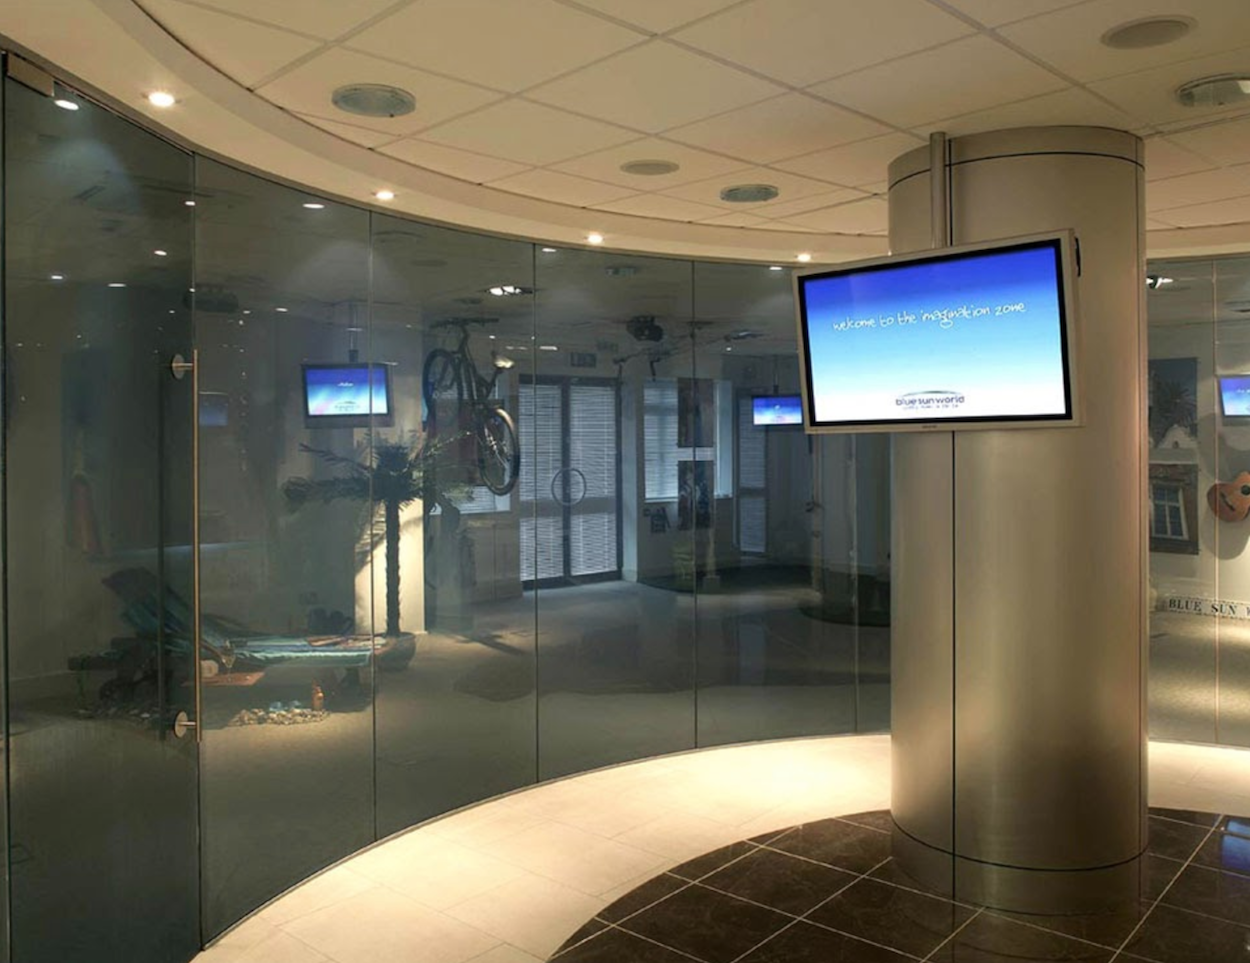 LCD privacy smart glass is the ultimate in customizable privacy